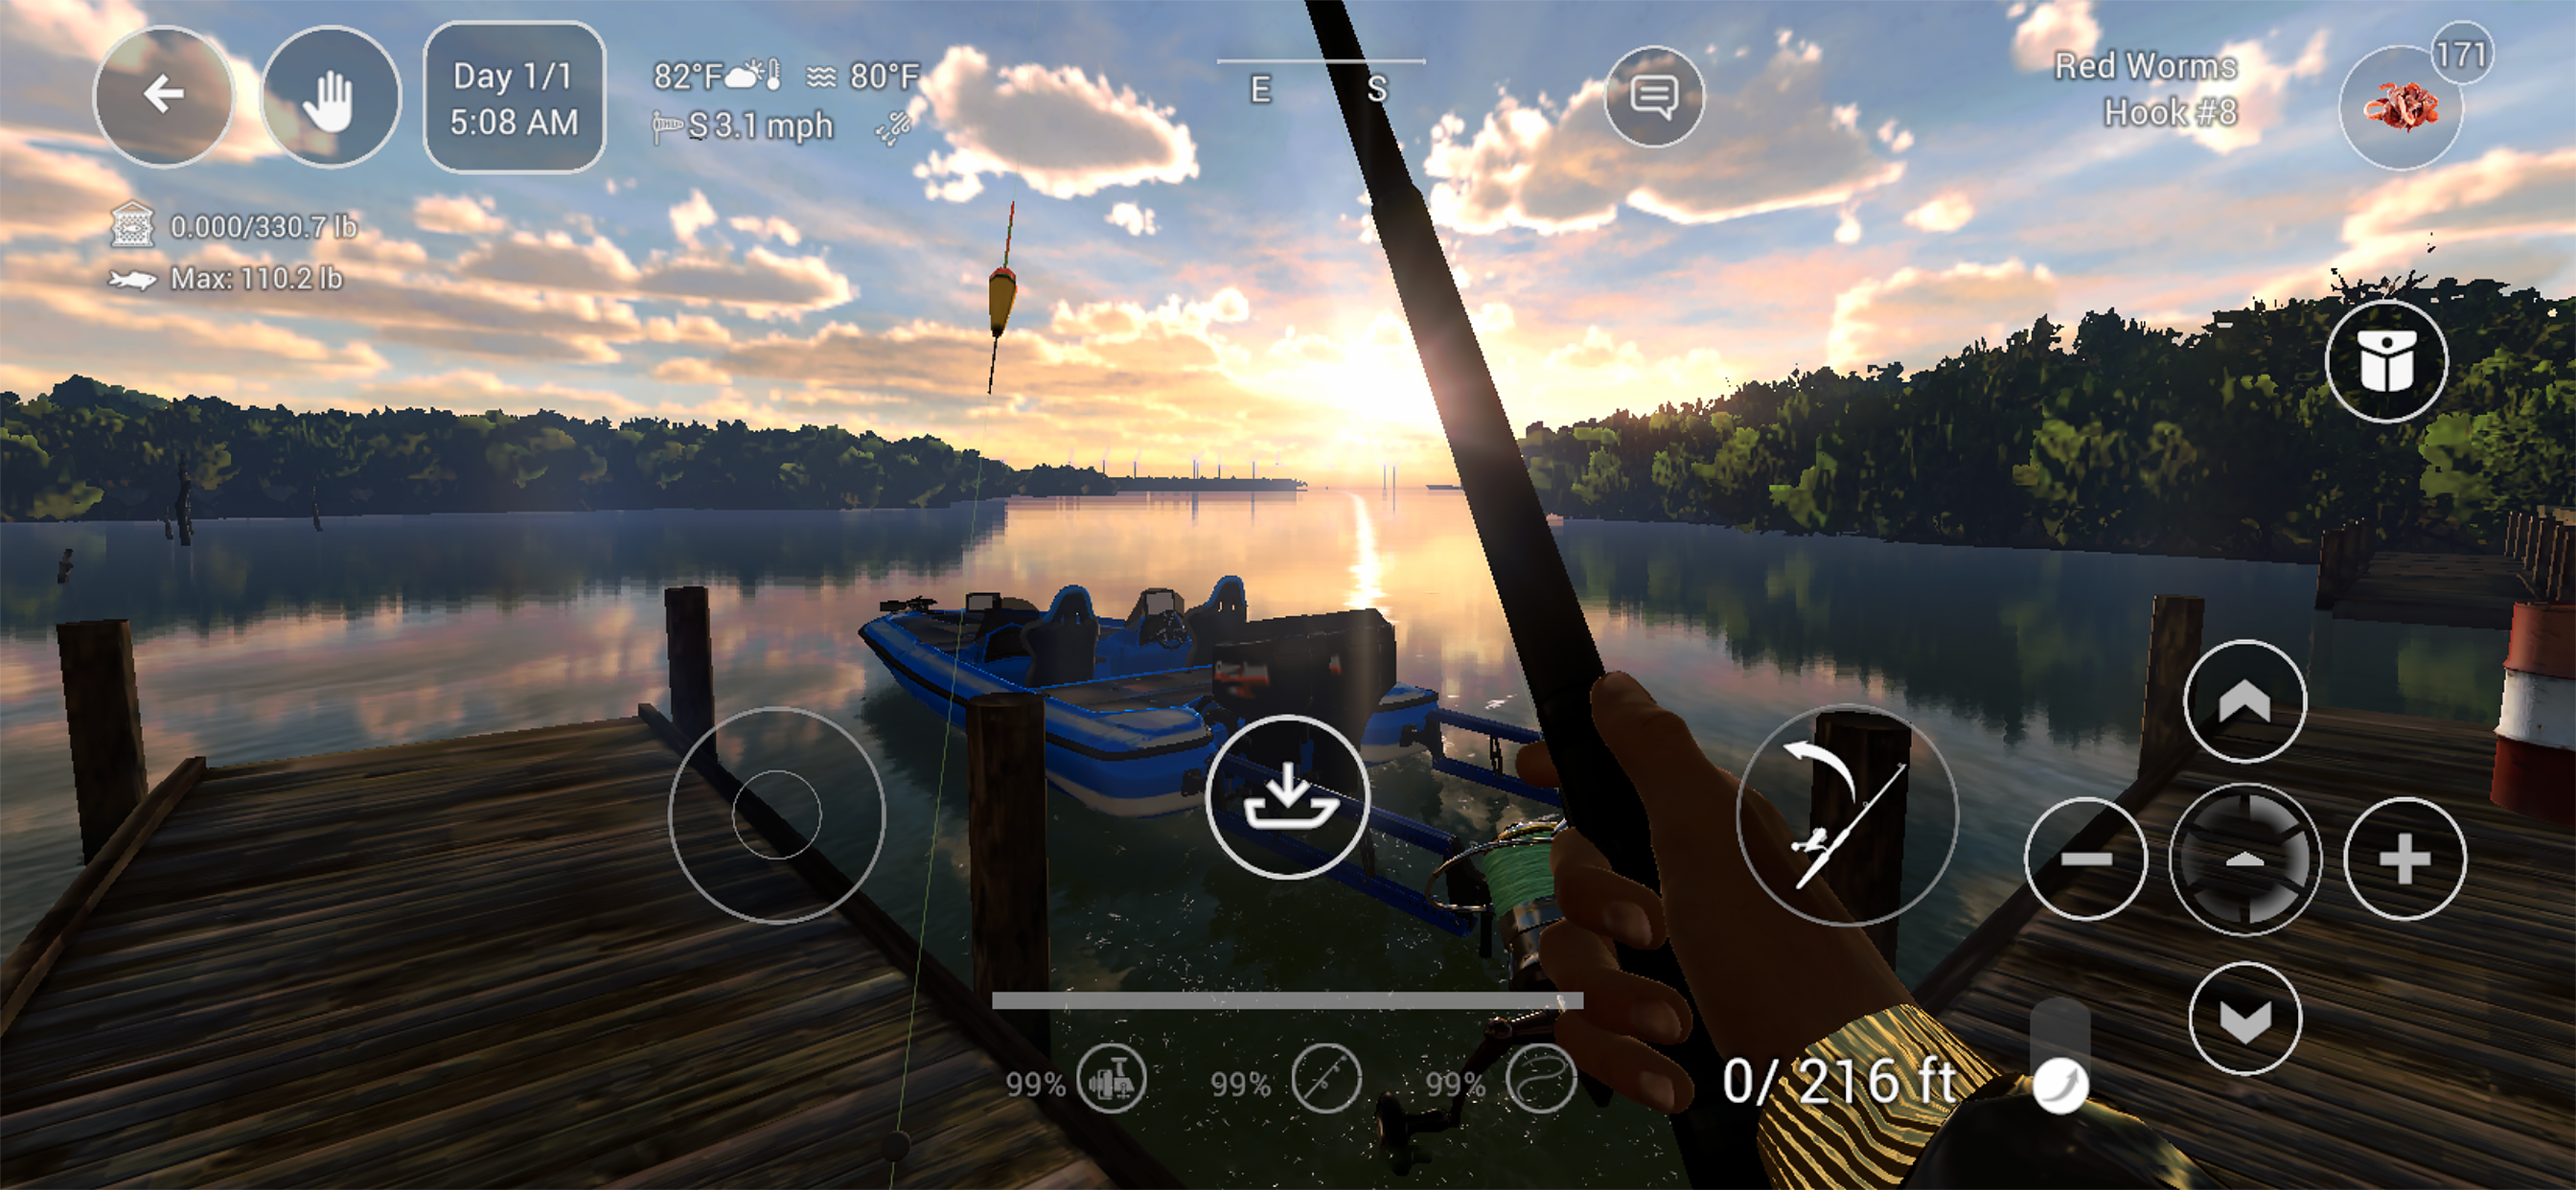 Hooked for Android - Download the APK from Uptodown